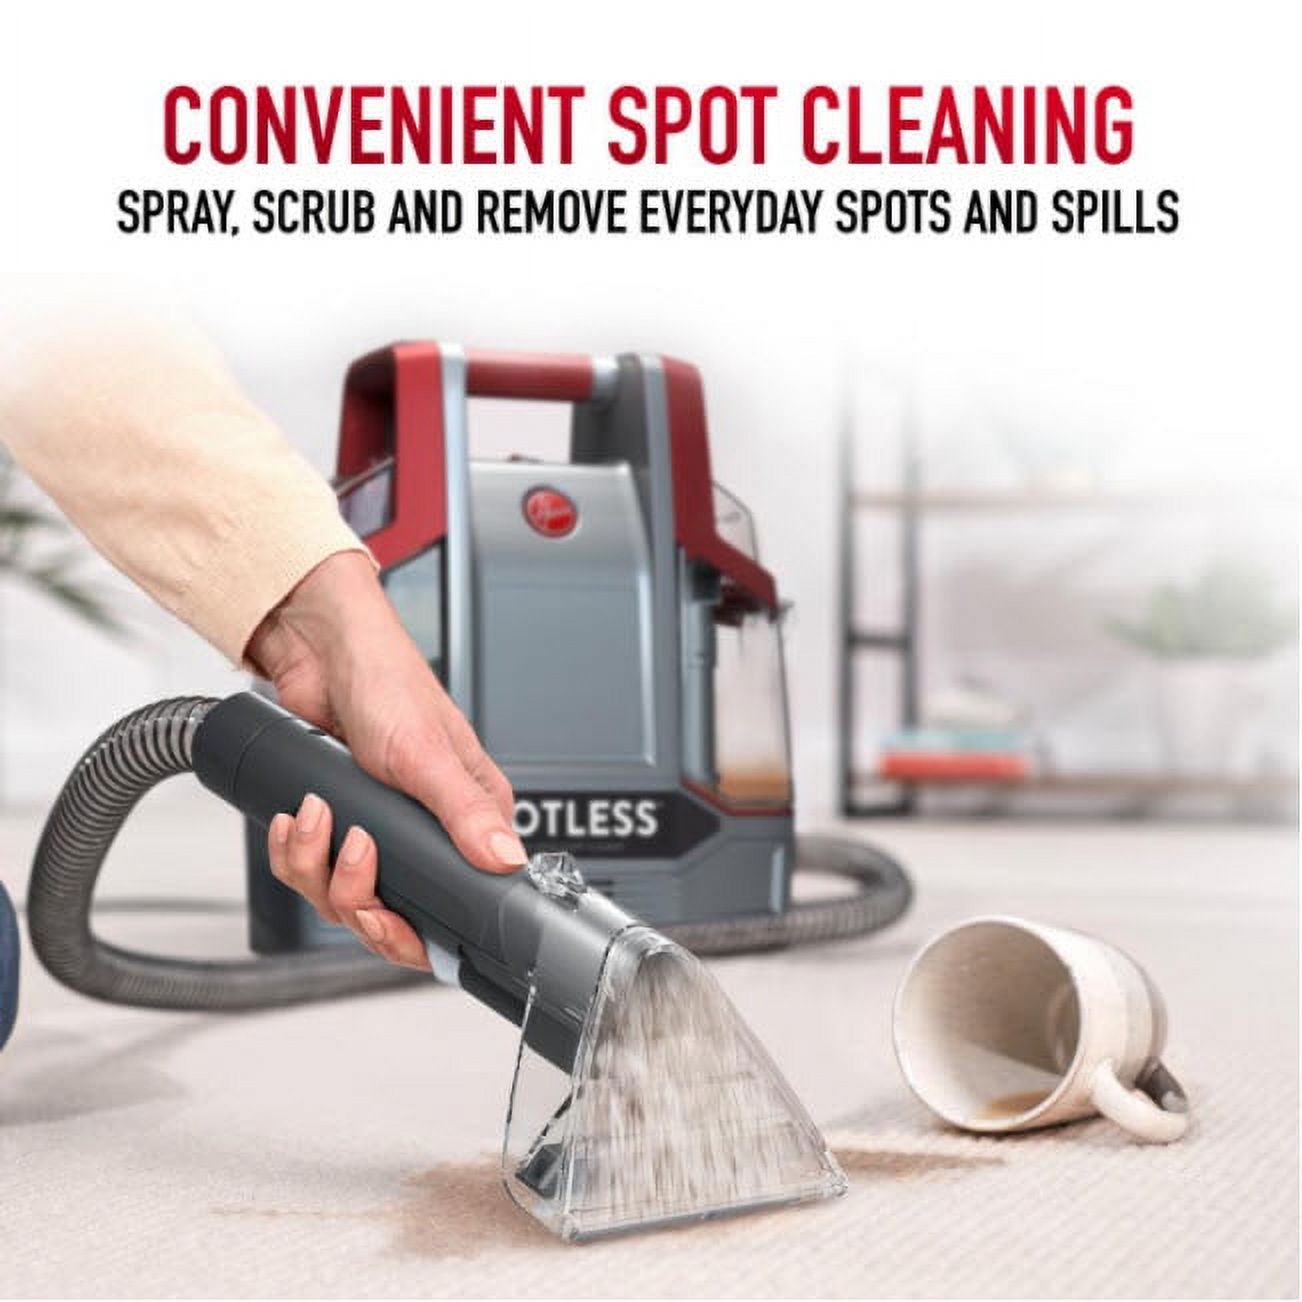 Hoover Spotless Portable Carpet and Upholstery Spot Cleaner, FH11201 - image 5 of 14